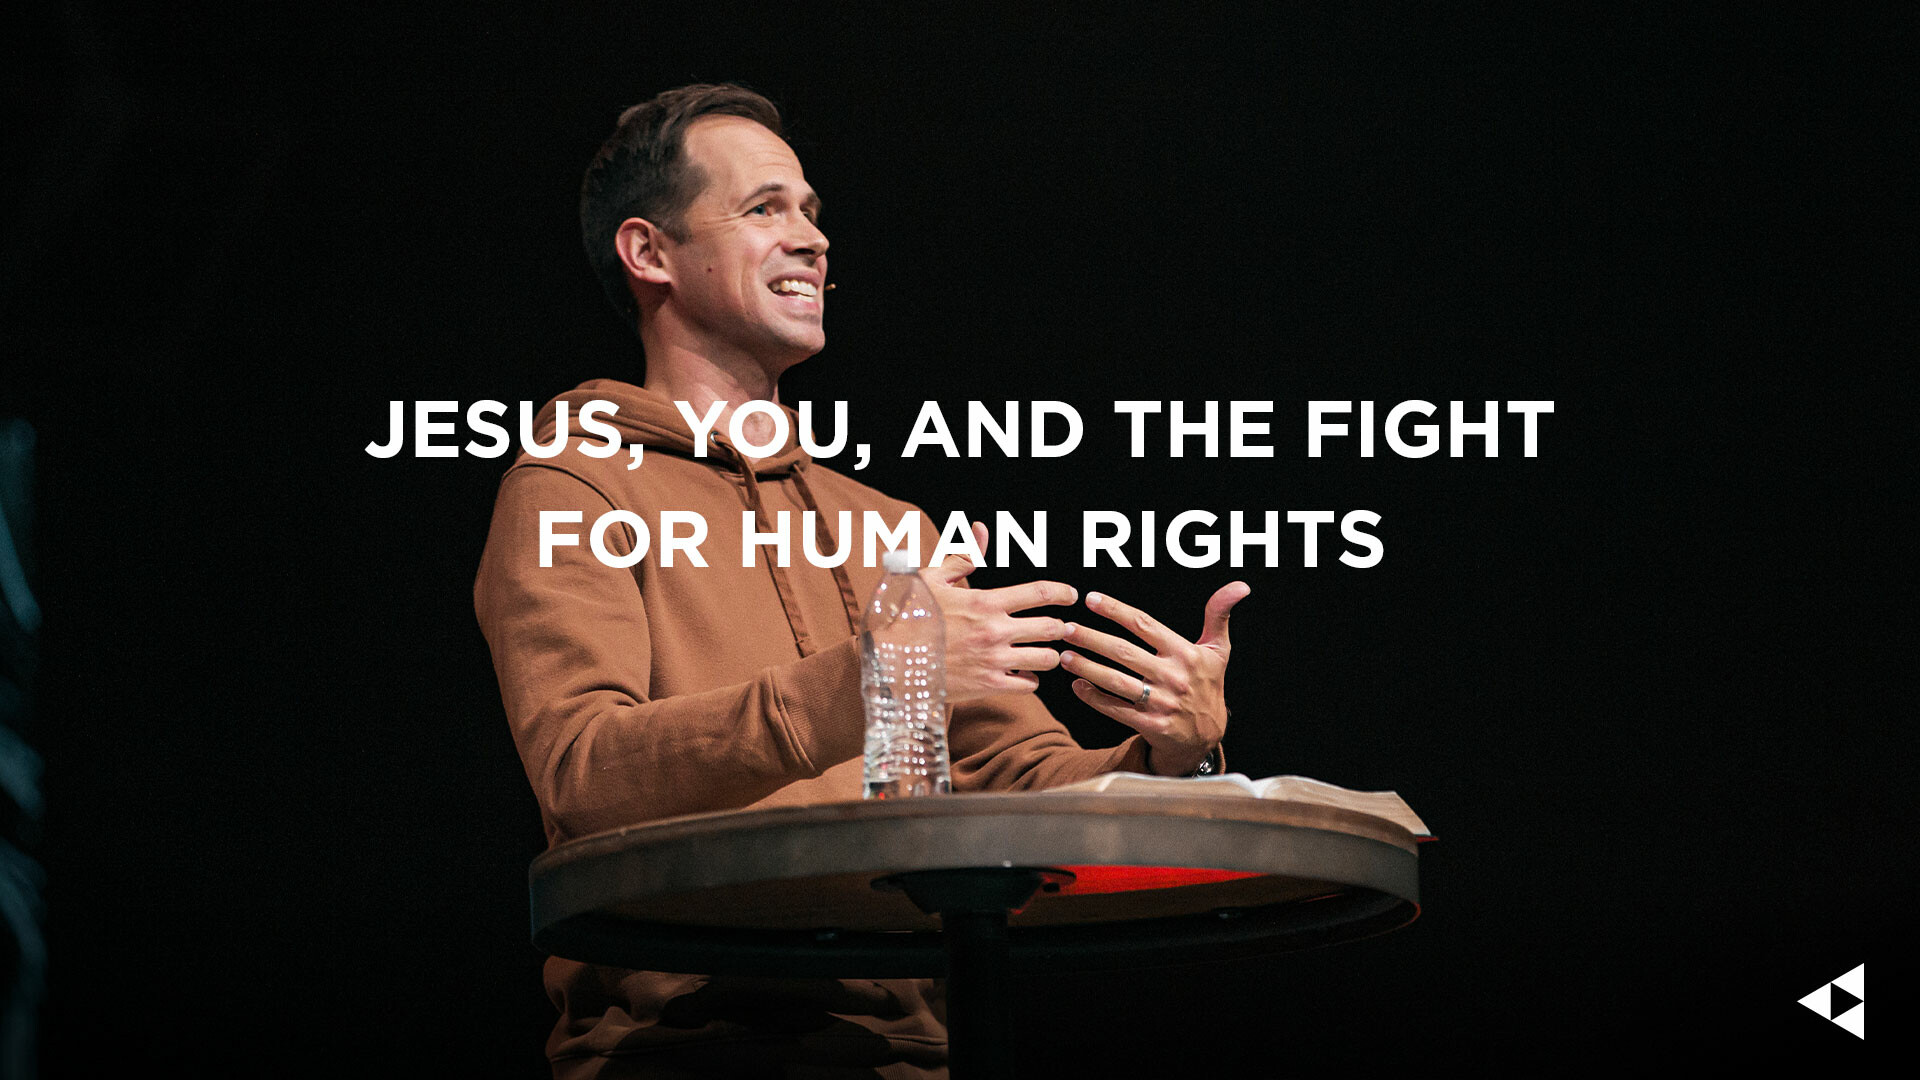 Jesus, You, and the Fight for Human Rights